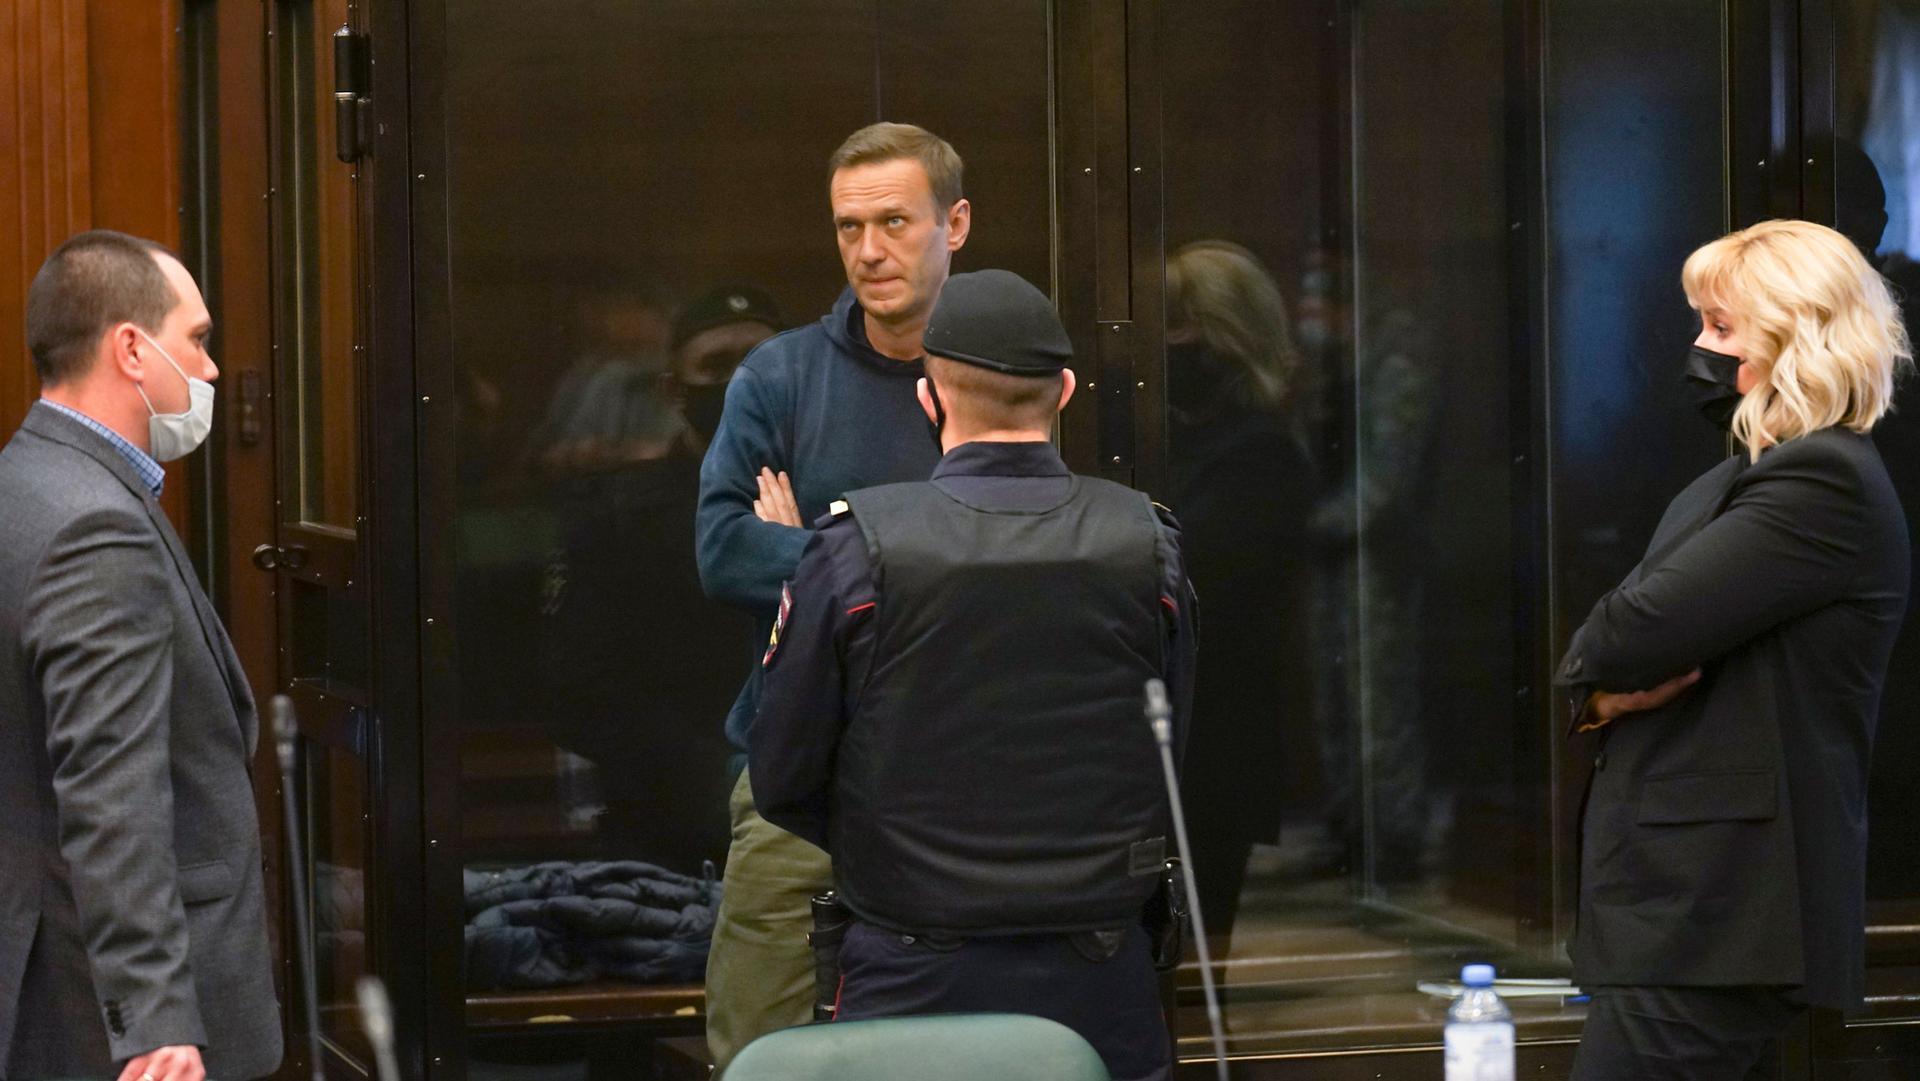 Alexei Navalny is shown standing inside of a clear glass cage in a courtroom with three people on the outside looking in on him.